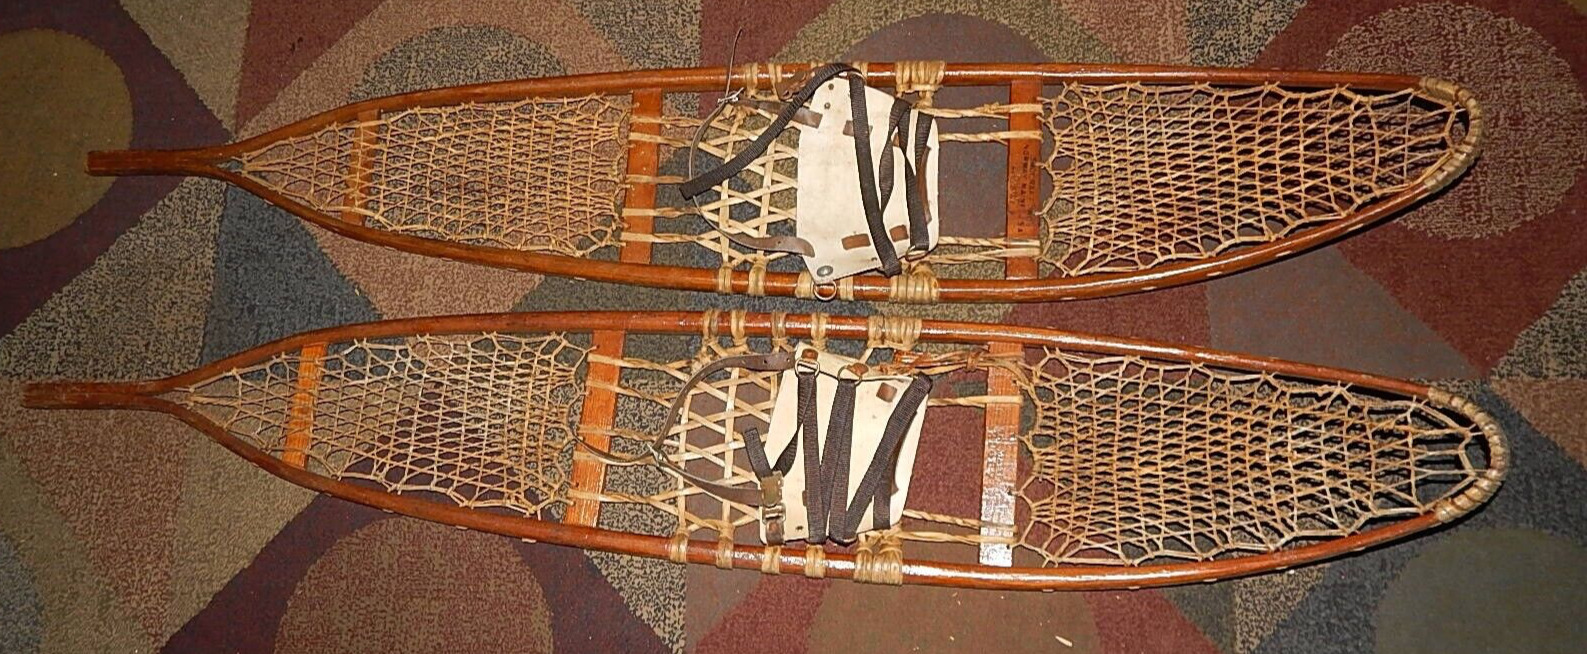 WWII WW2 1943 Snocraft snowshoes U.S. US 10th Mountain Division Div. 10x58